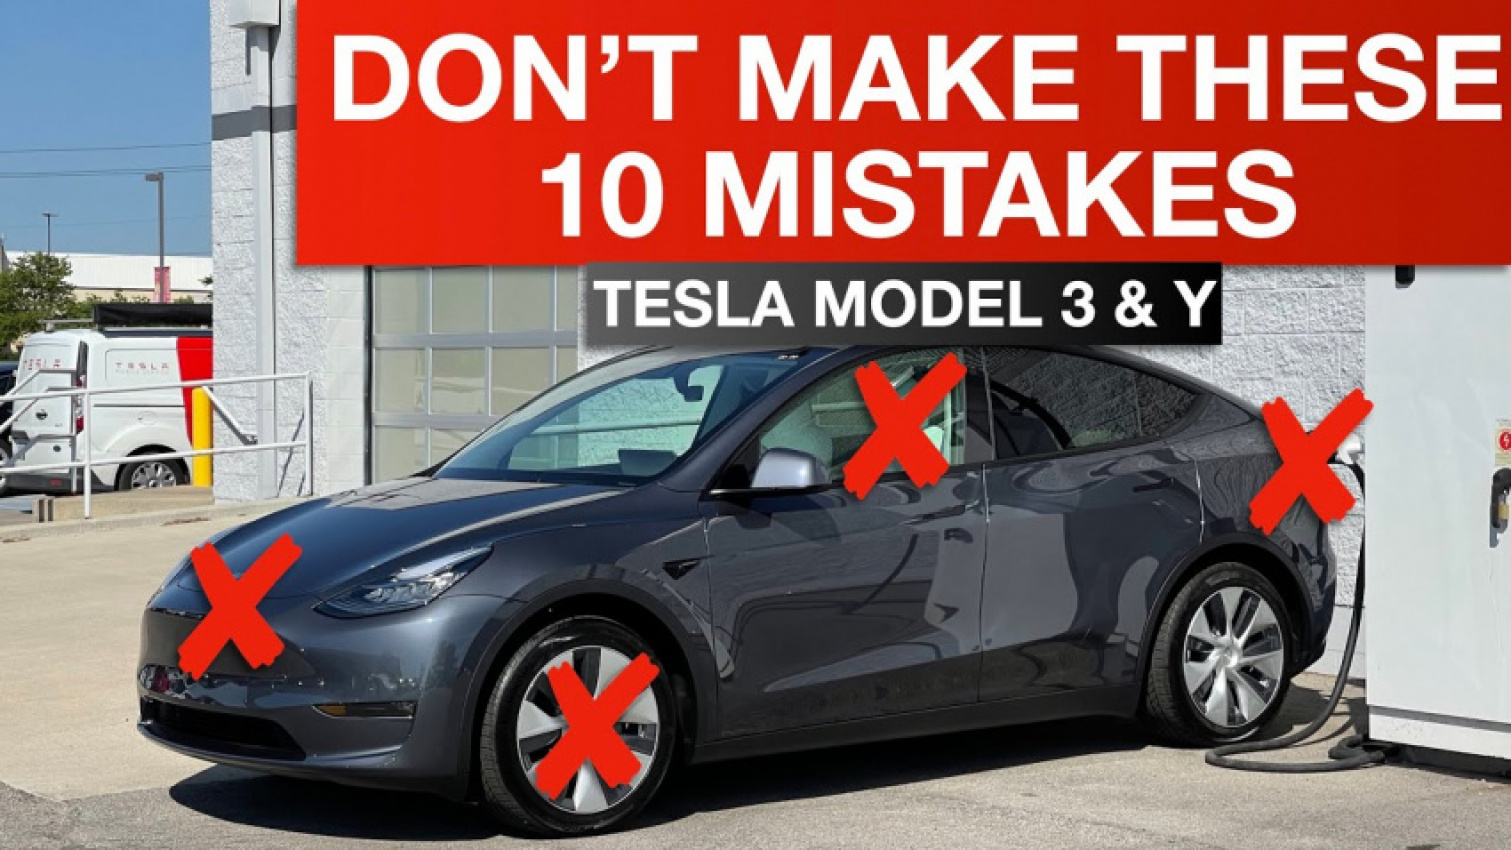 autos, cars, tesla, 2020 model y, 2021 model y, 7 seater model y, amazon, cheaper model y, long range model y, model 3 order, model y, model y 7 seat interior, model y 7 seater, model y interior, model y lease, model y long range, model y lr awd, model y order, model y performance, model y refresh, model y sr, model y standard range, model y tesla, new model y, new tesla, new tesla model y, performance model y, standard range model y, tesla family model, tesla mistakes, tesla model y, tesla news, tesla order, amazon, tesla model y & 3 – don't make these 10 mistakes